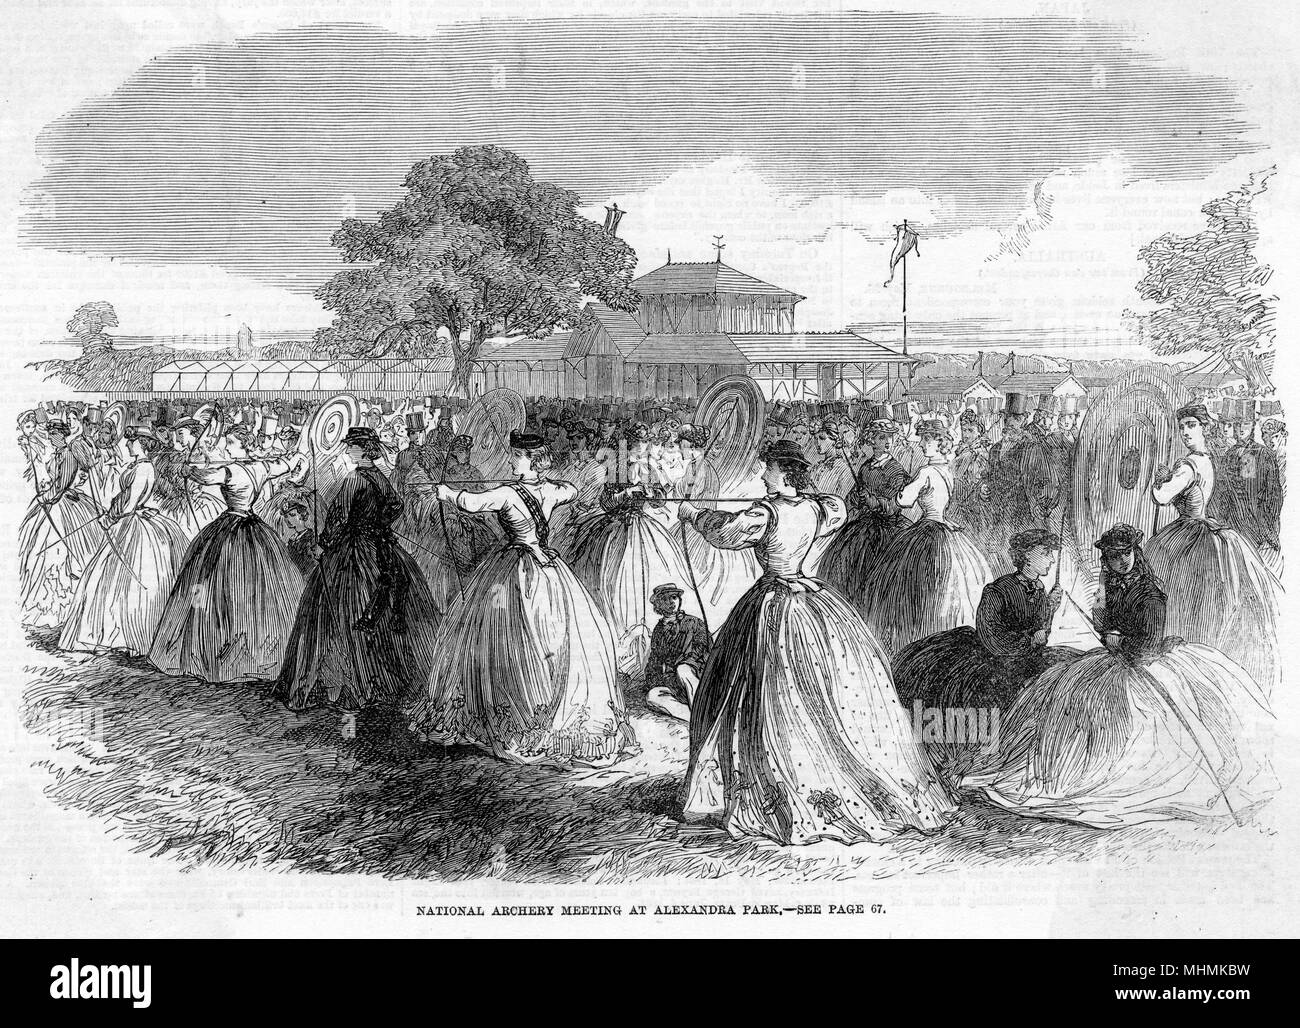 Female archers compete during a National Archery meeting at Alexandra Park, London.       Date: 1864 Stock Photo